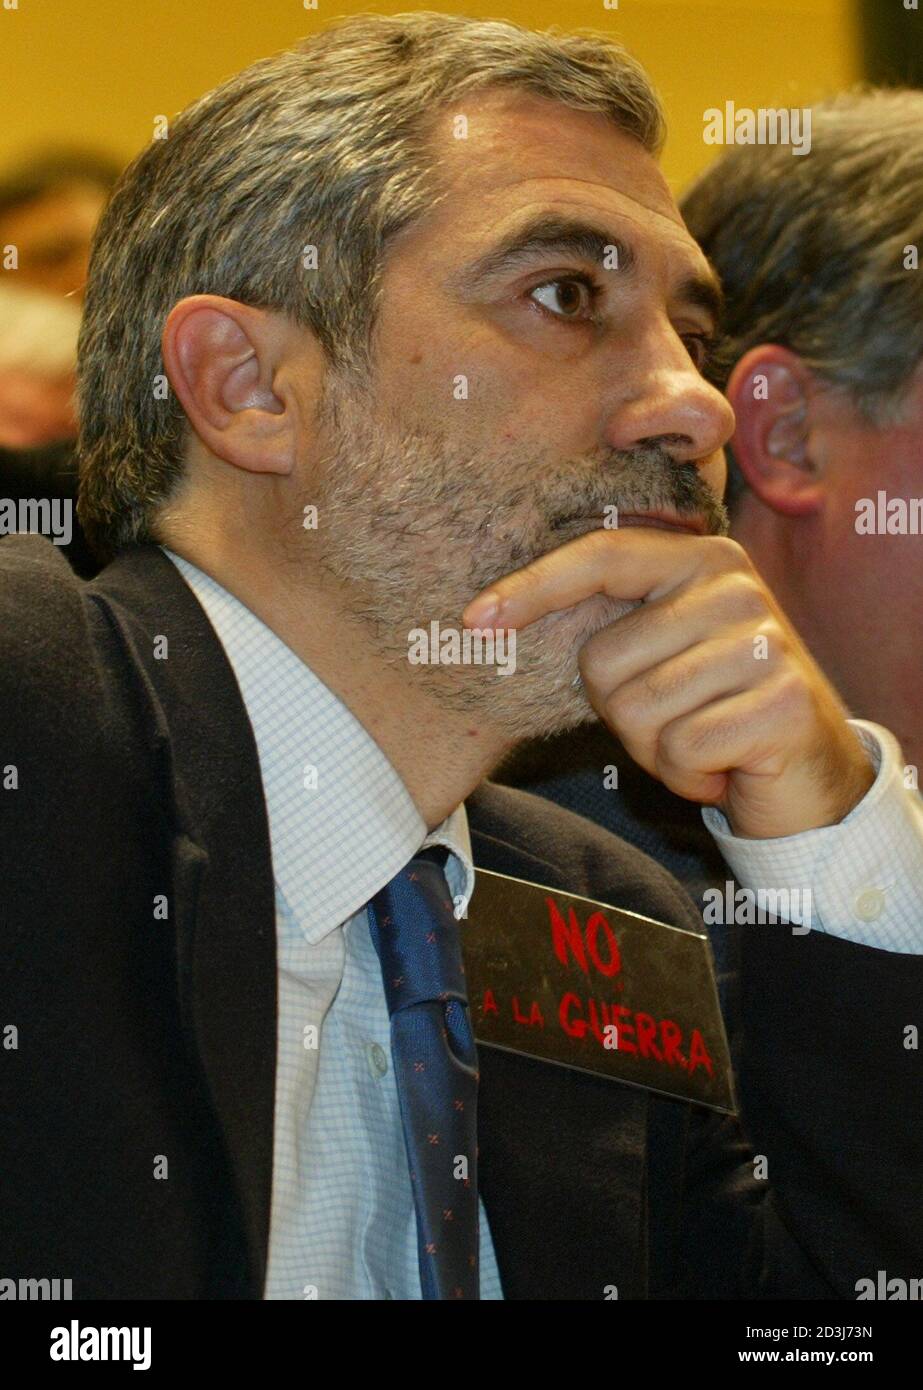 Spanish United Left party leader Gaspar Llamazares wears a 'No to war' badge as he listens to prime Minister Aznar's speech backing a U.S and British invasion of Iraq on February 5, 2003. Six members of parliament from the United Left party held up 'No to war' posters in the chamber before and after Aznar's speech in silent protest against government policy and later a group of well-known actors were shepherded out of the public gallery after displaying t-shirts bearing the same slogan. REUTERS/Desmond Boylan  DB Stock Photo